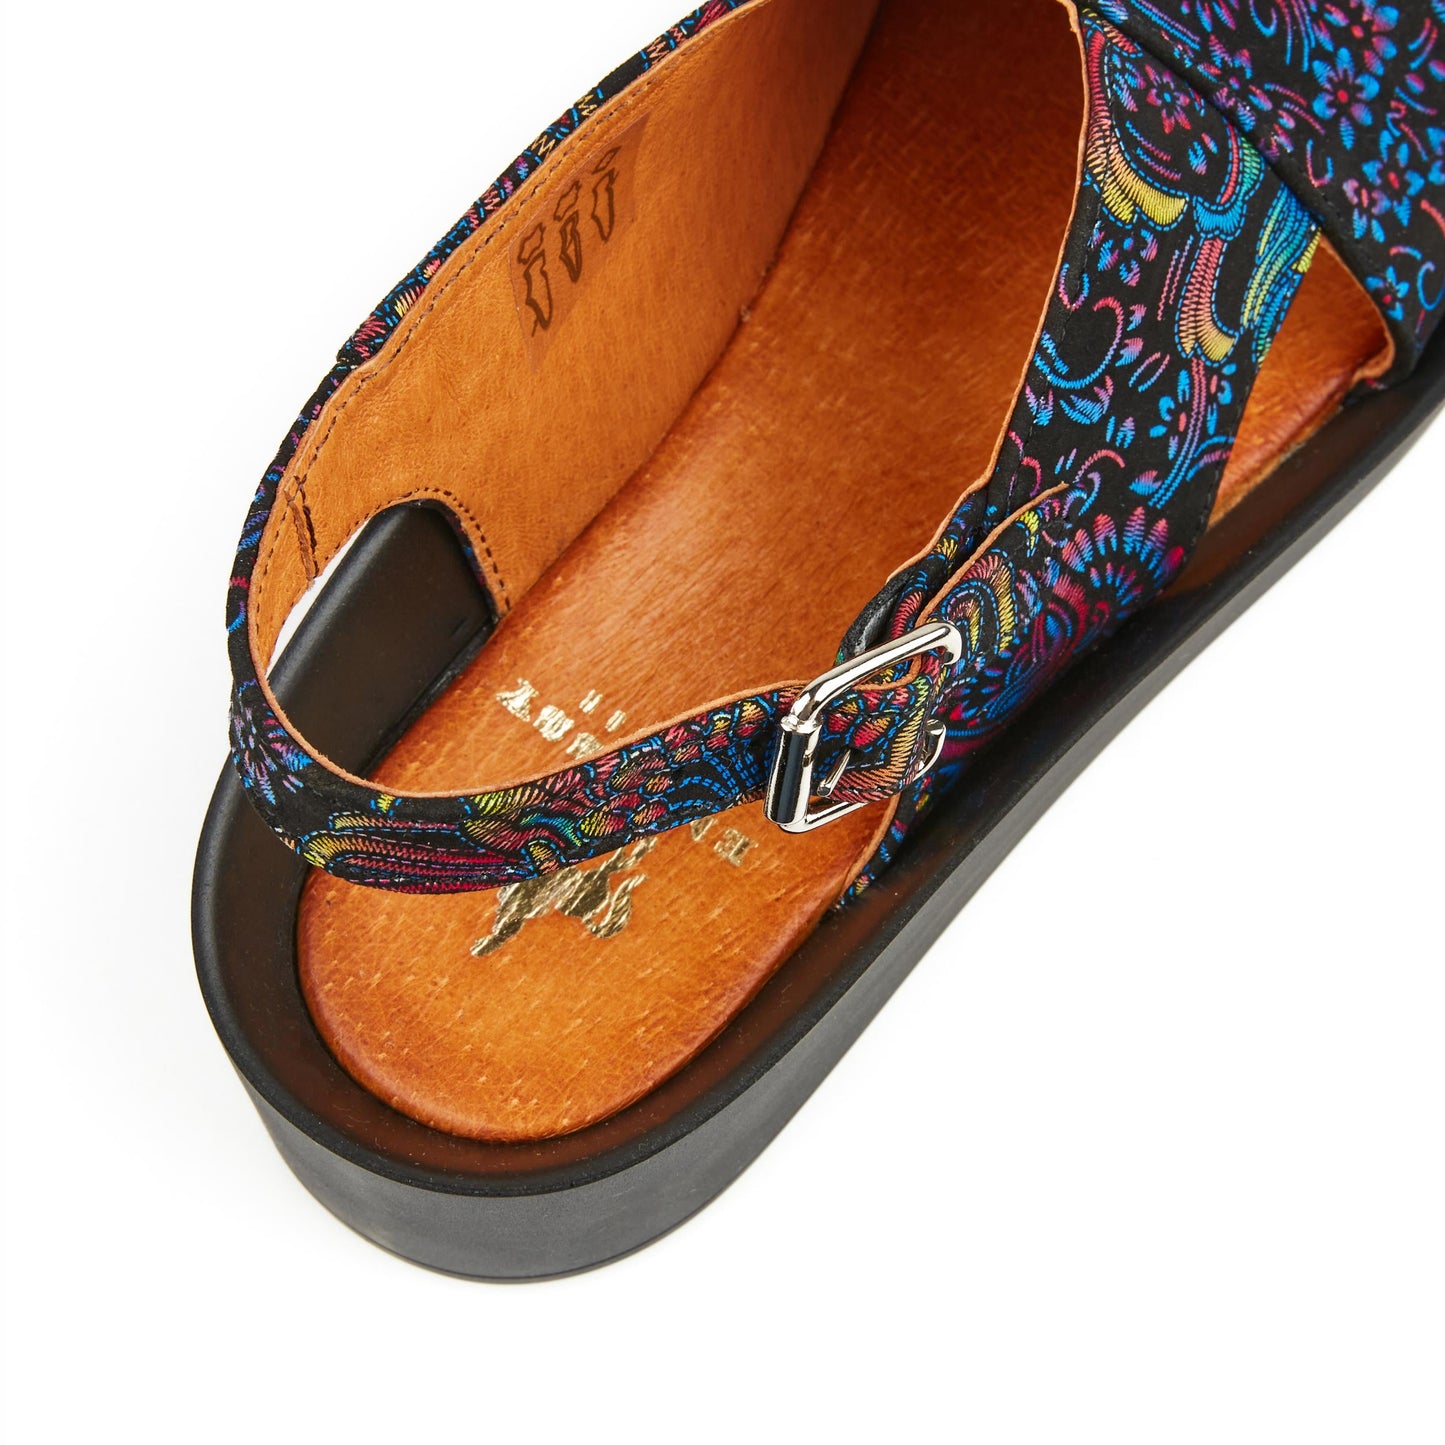 The Melody - Blue & Black Feathers Sandals Embassy London 